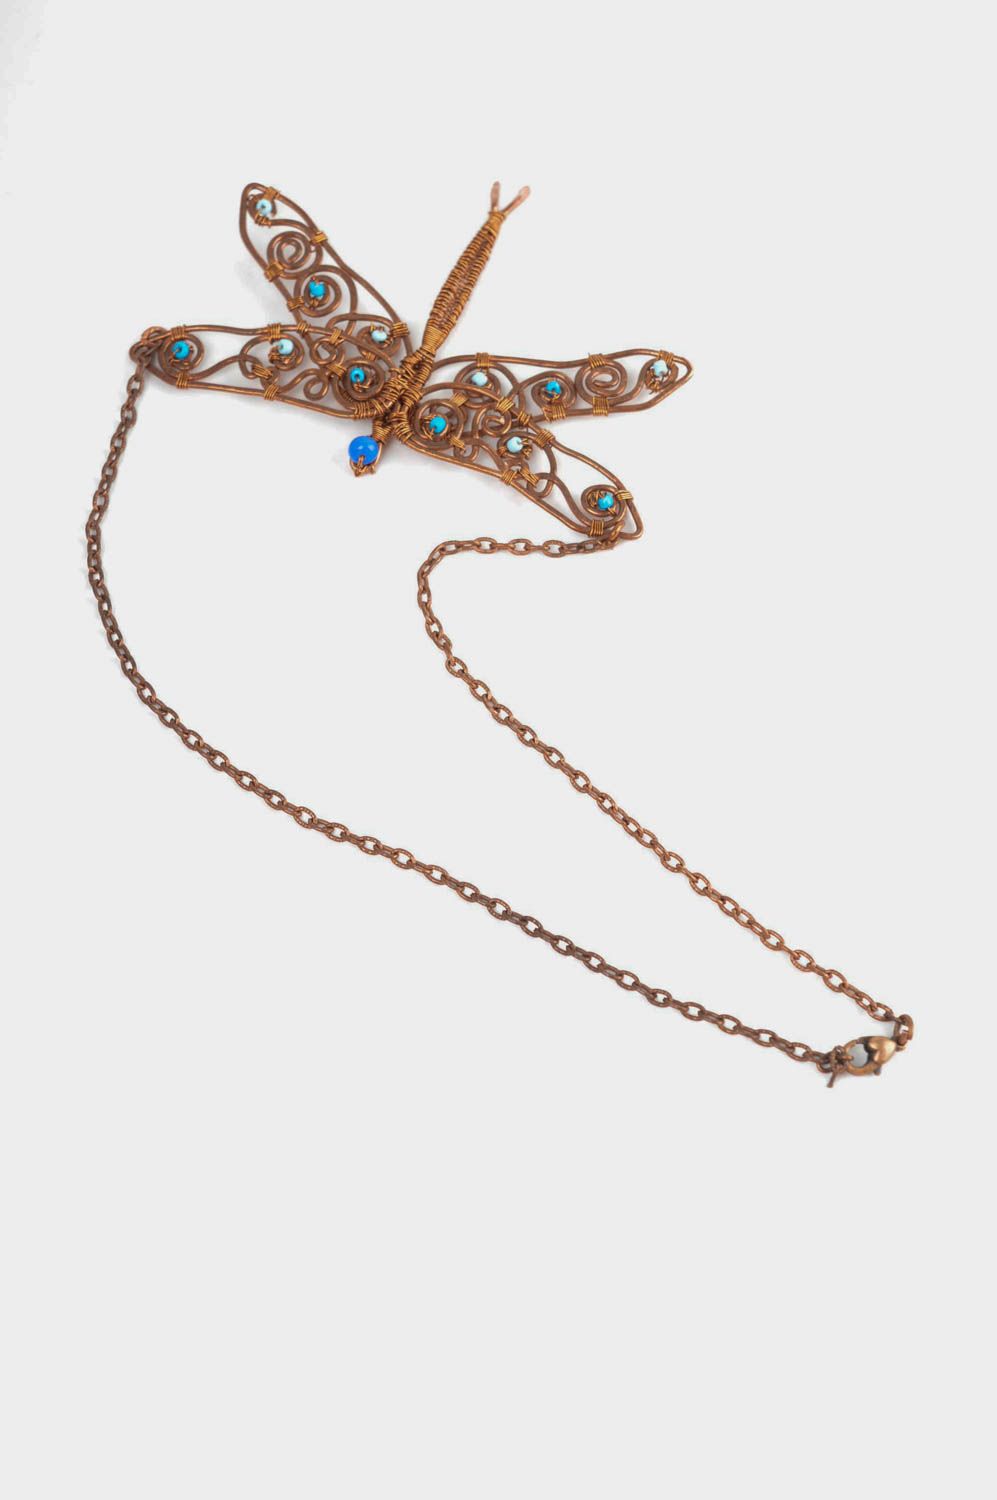 Handmade jewelry metal necklace copper pendant necklace dragonfly pendant photo 5